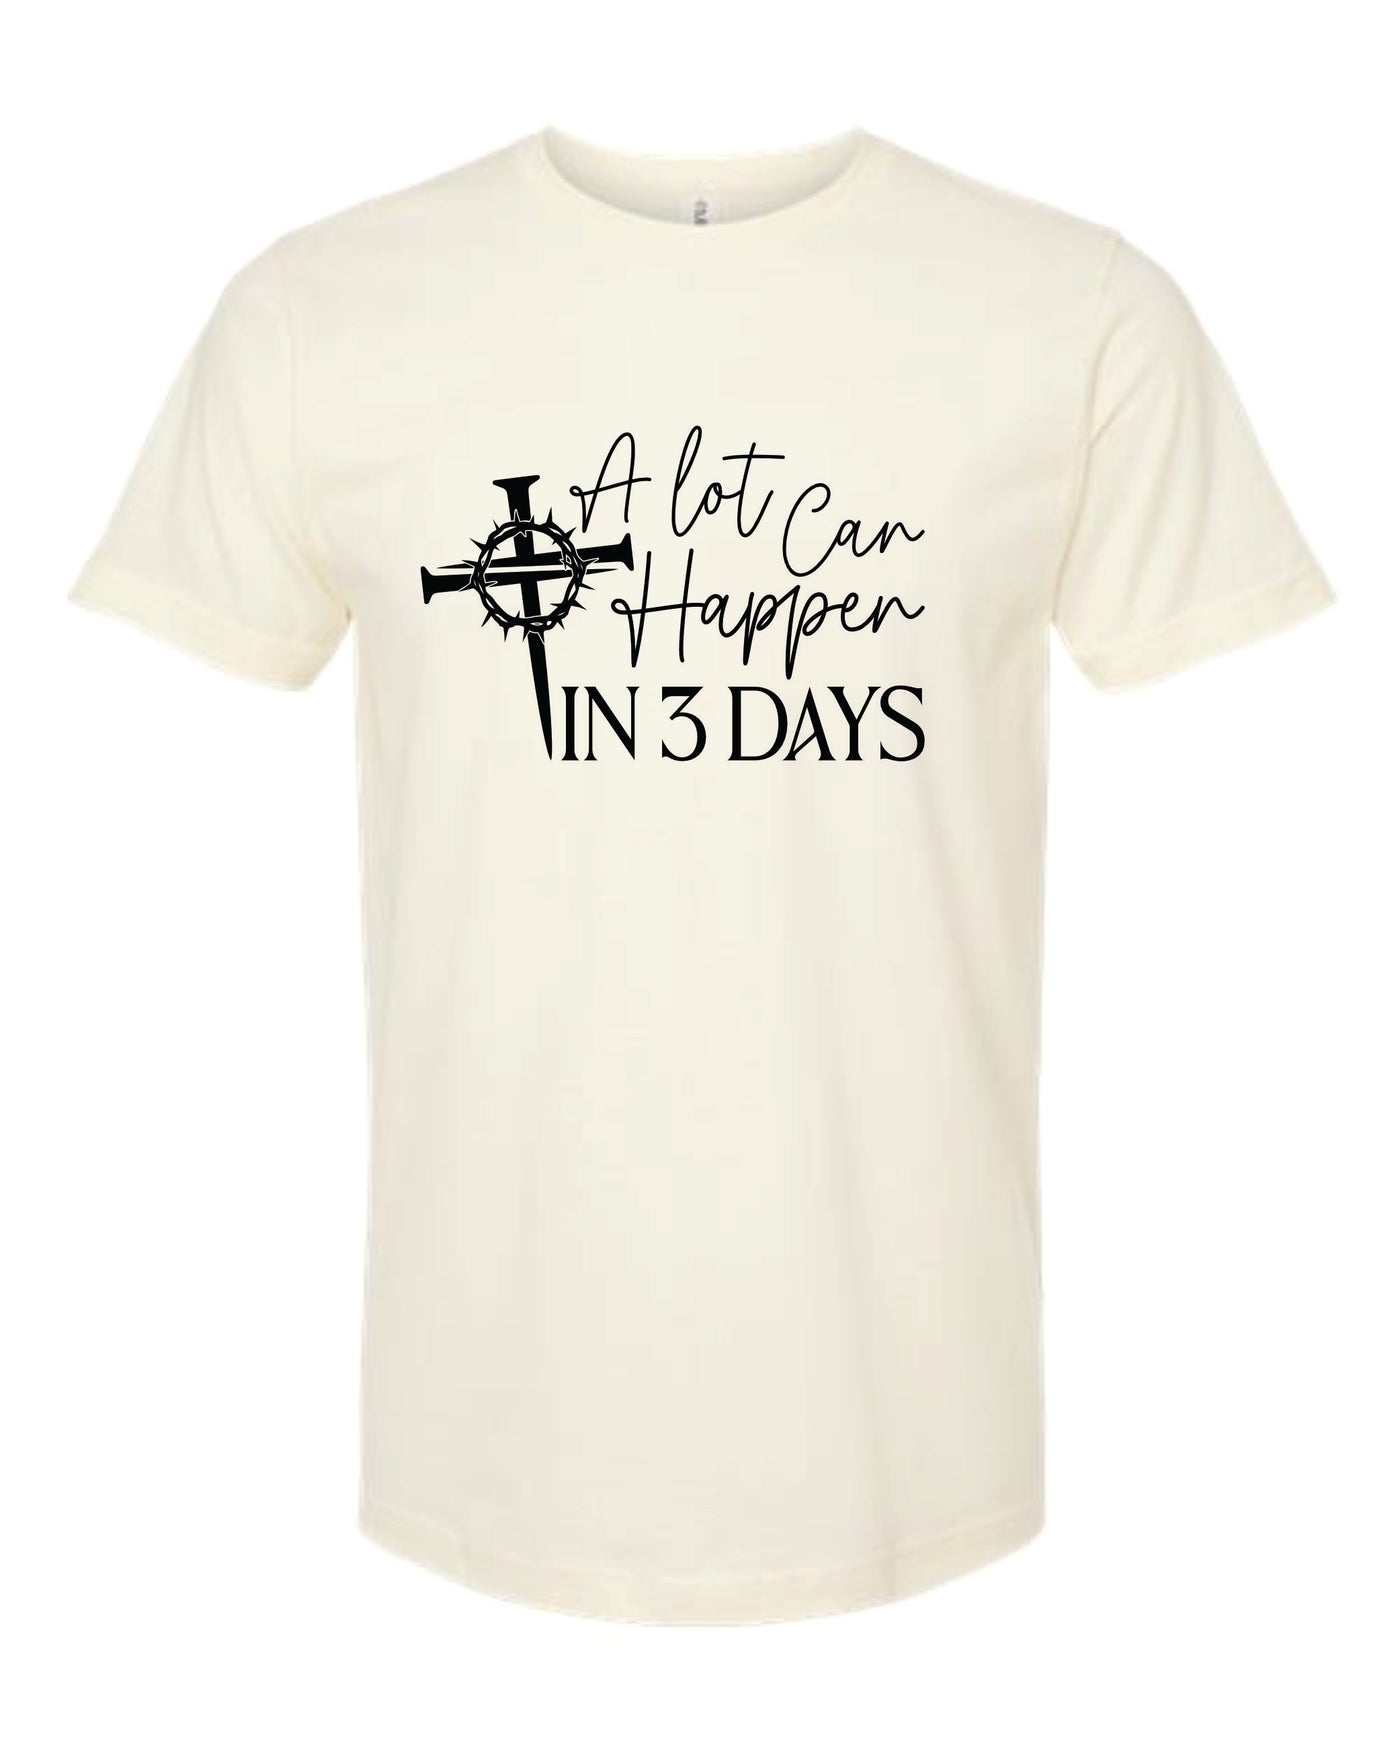 A Lot Can Happen In 3 Days Short Sleeve Graphic T-shirt